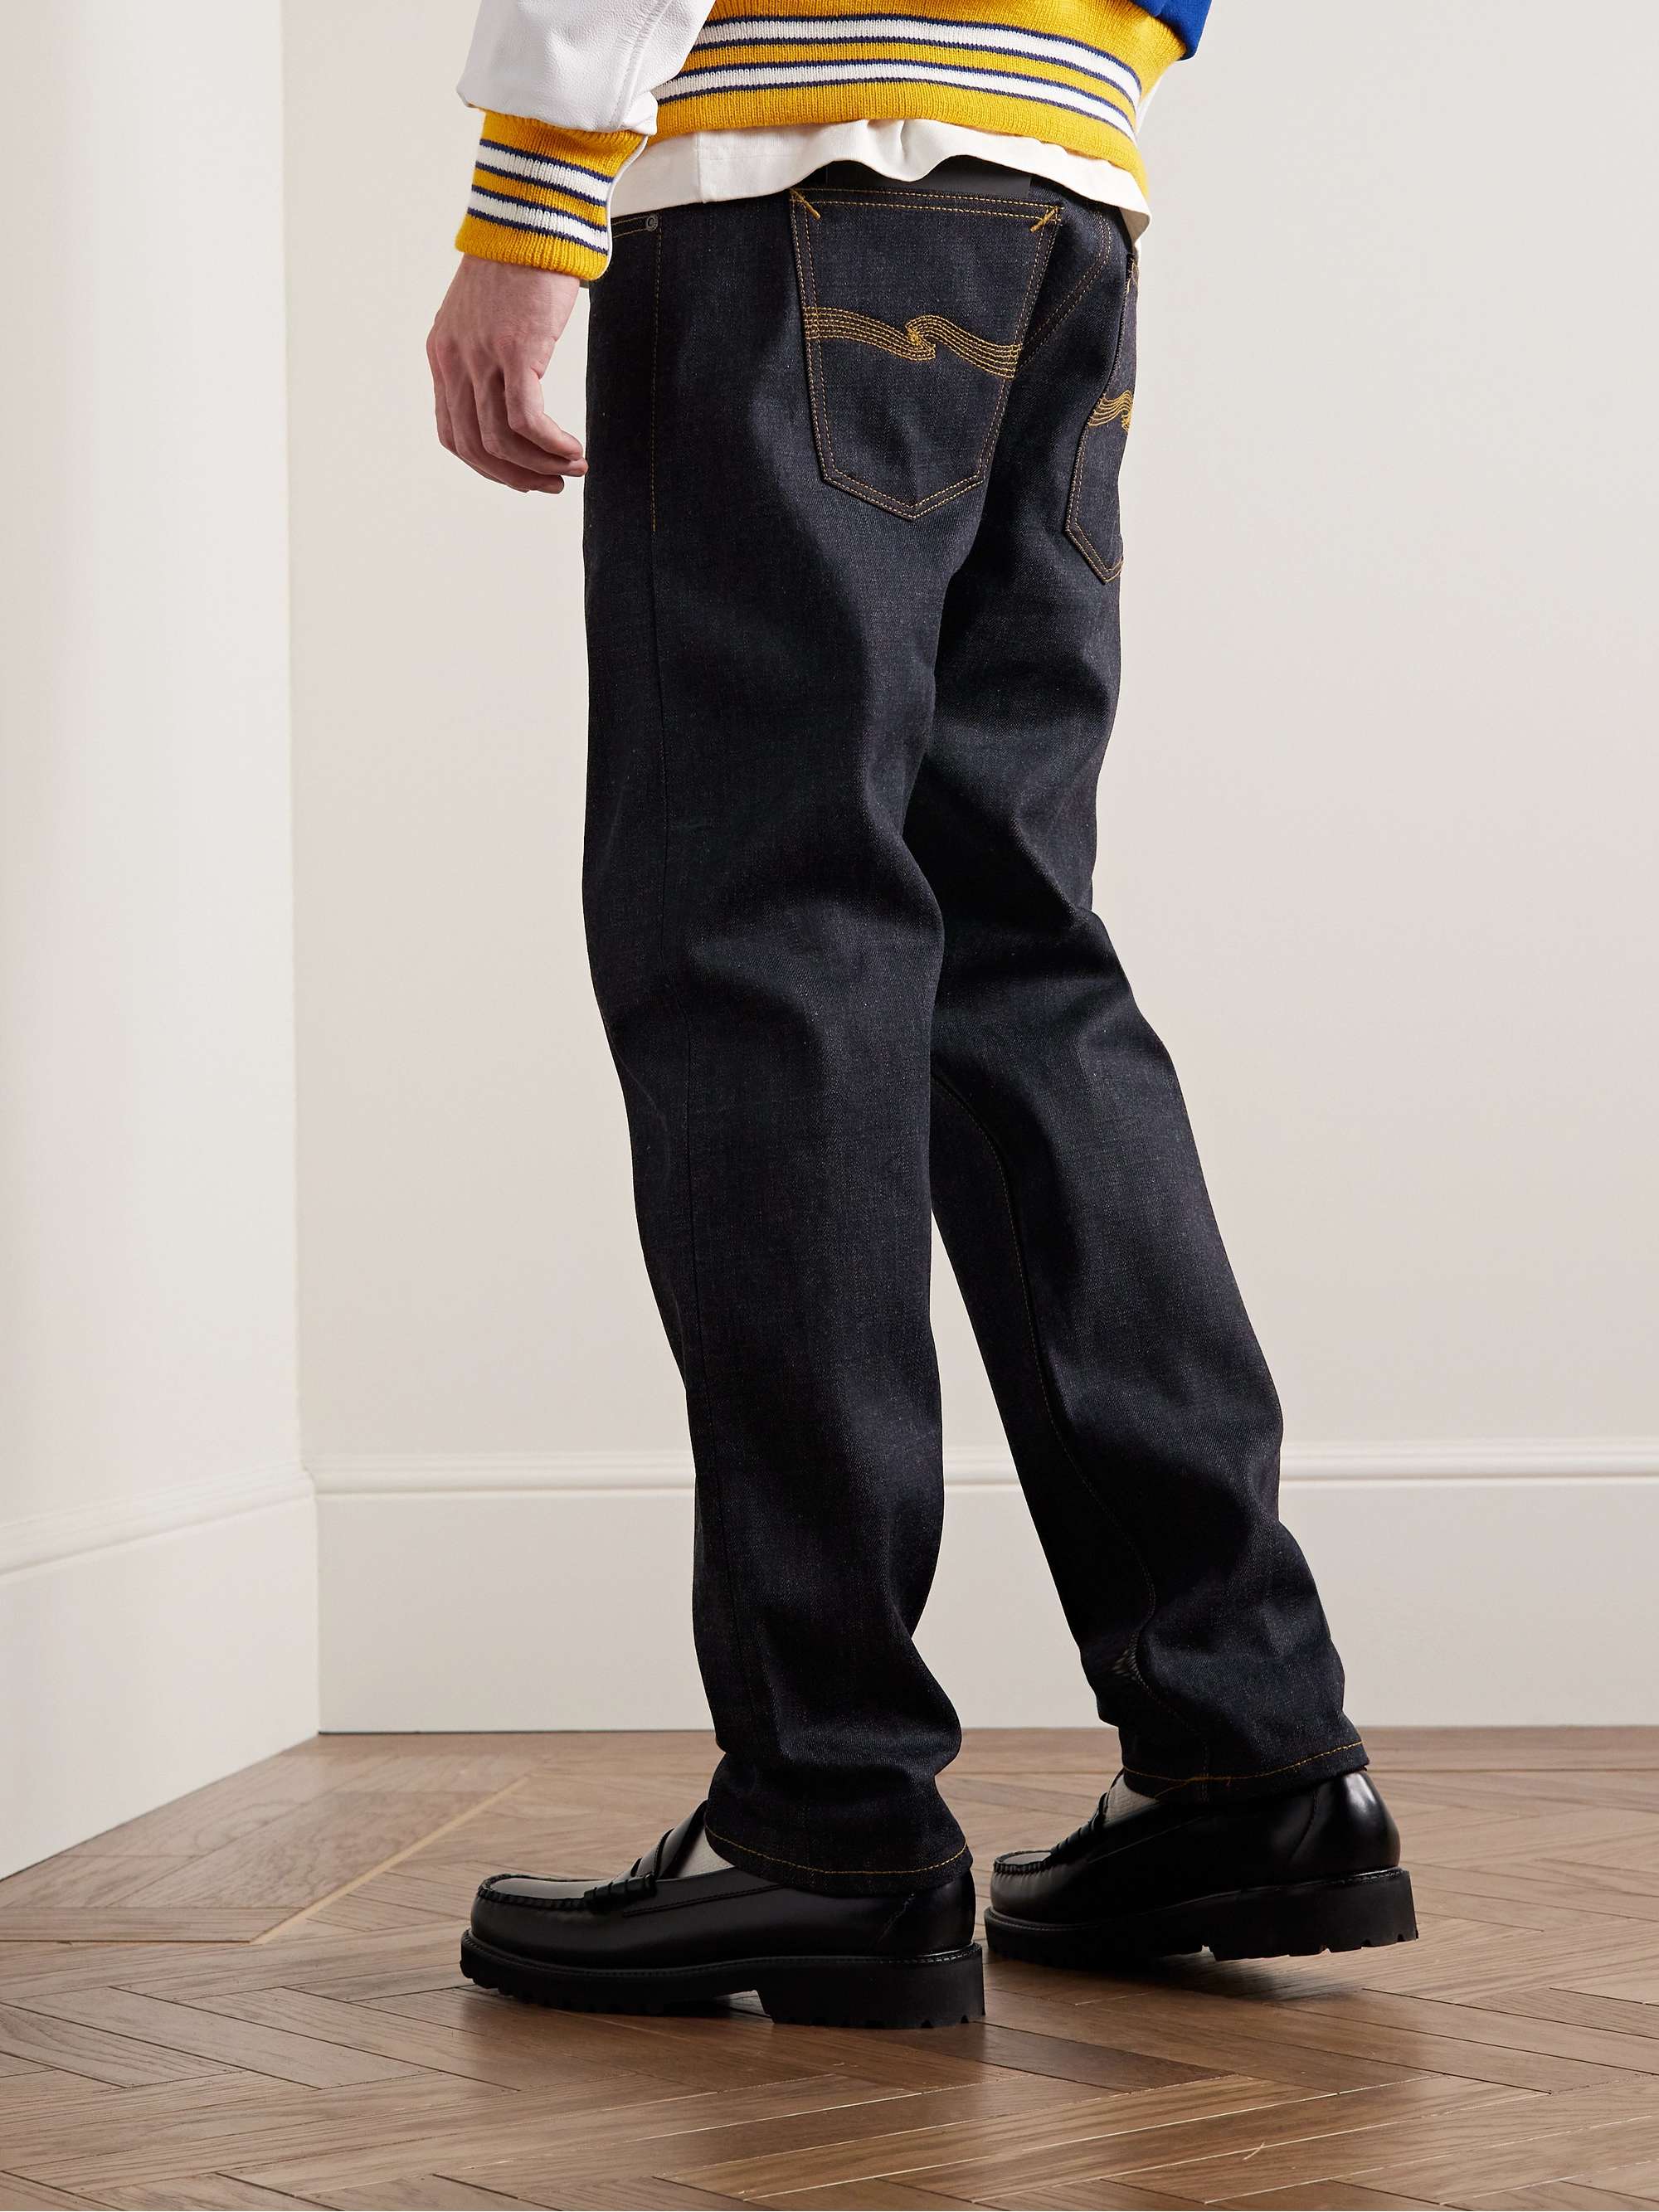 NUDIE JEANS Gritty Jackson Straight-Leg Selvage Jeans | MR PORTER